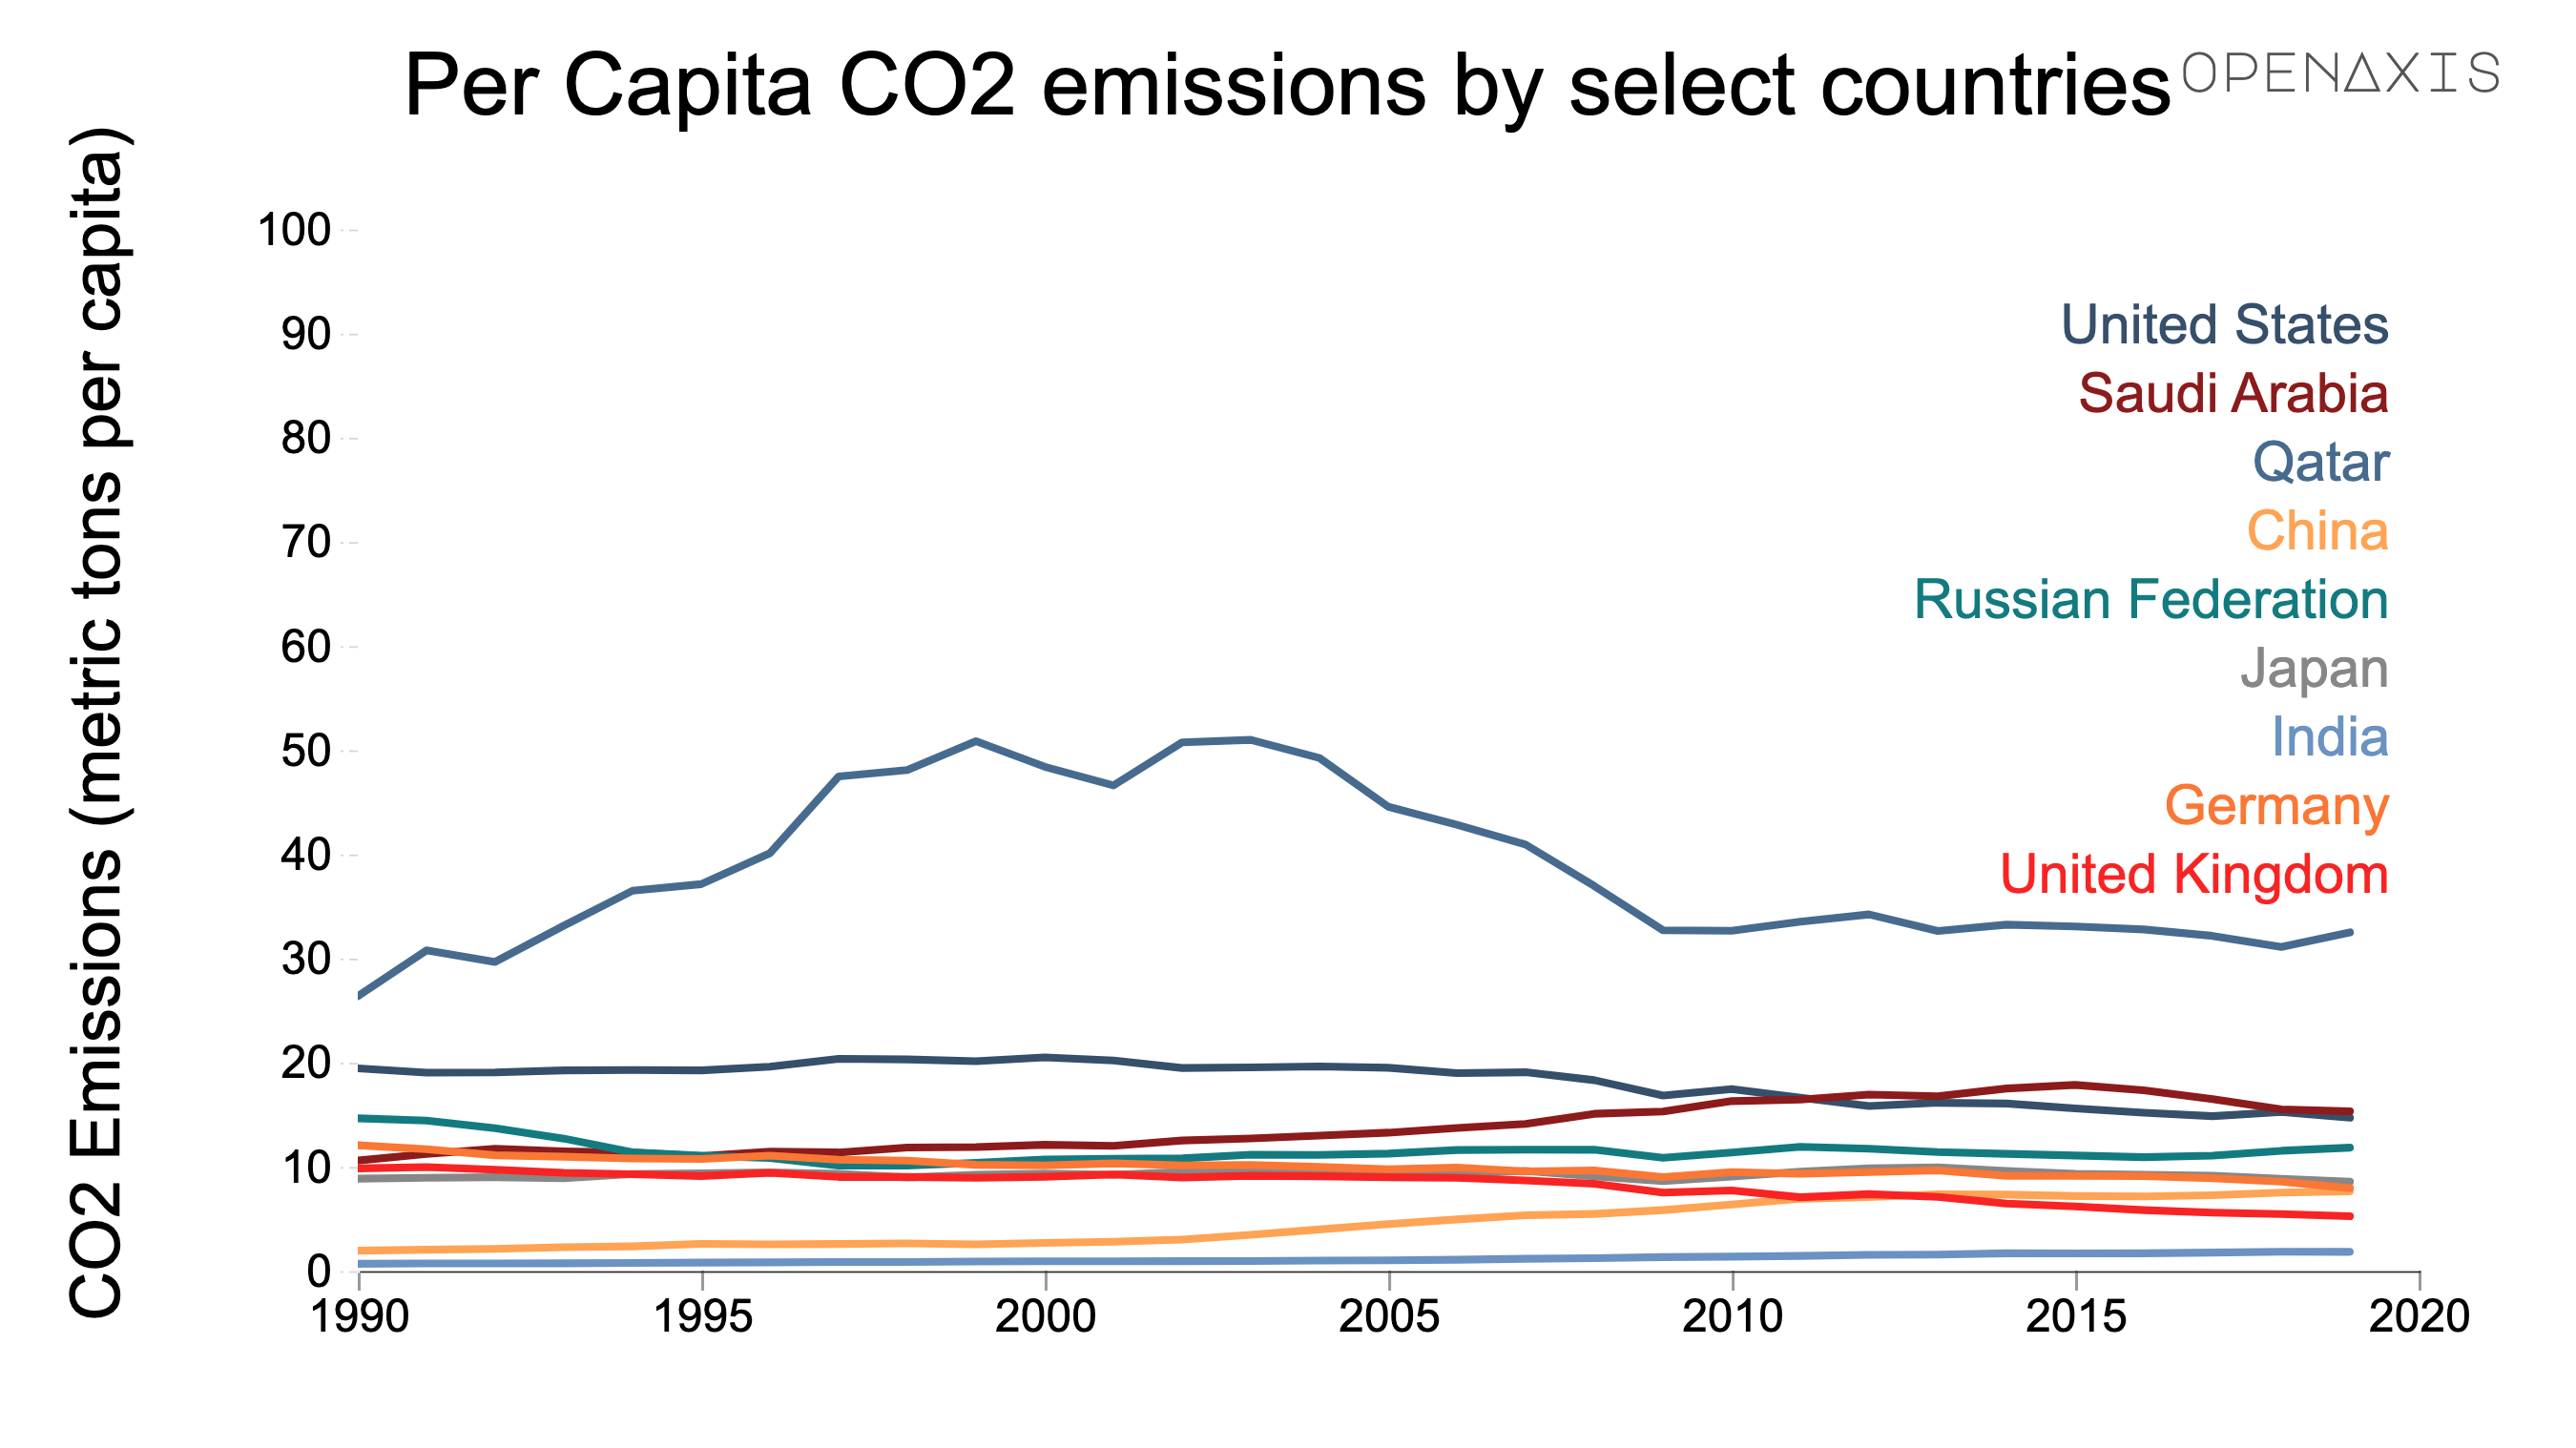 "Per Capita CO2 emissions by select countries"